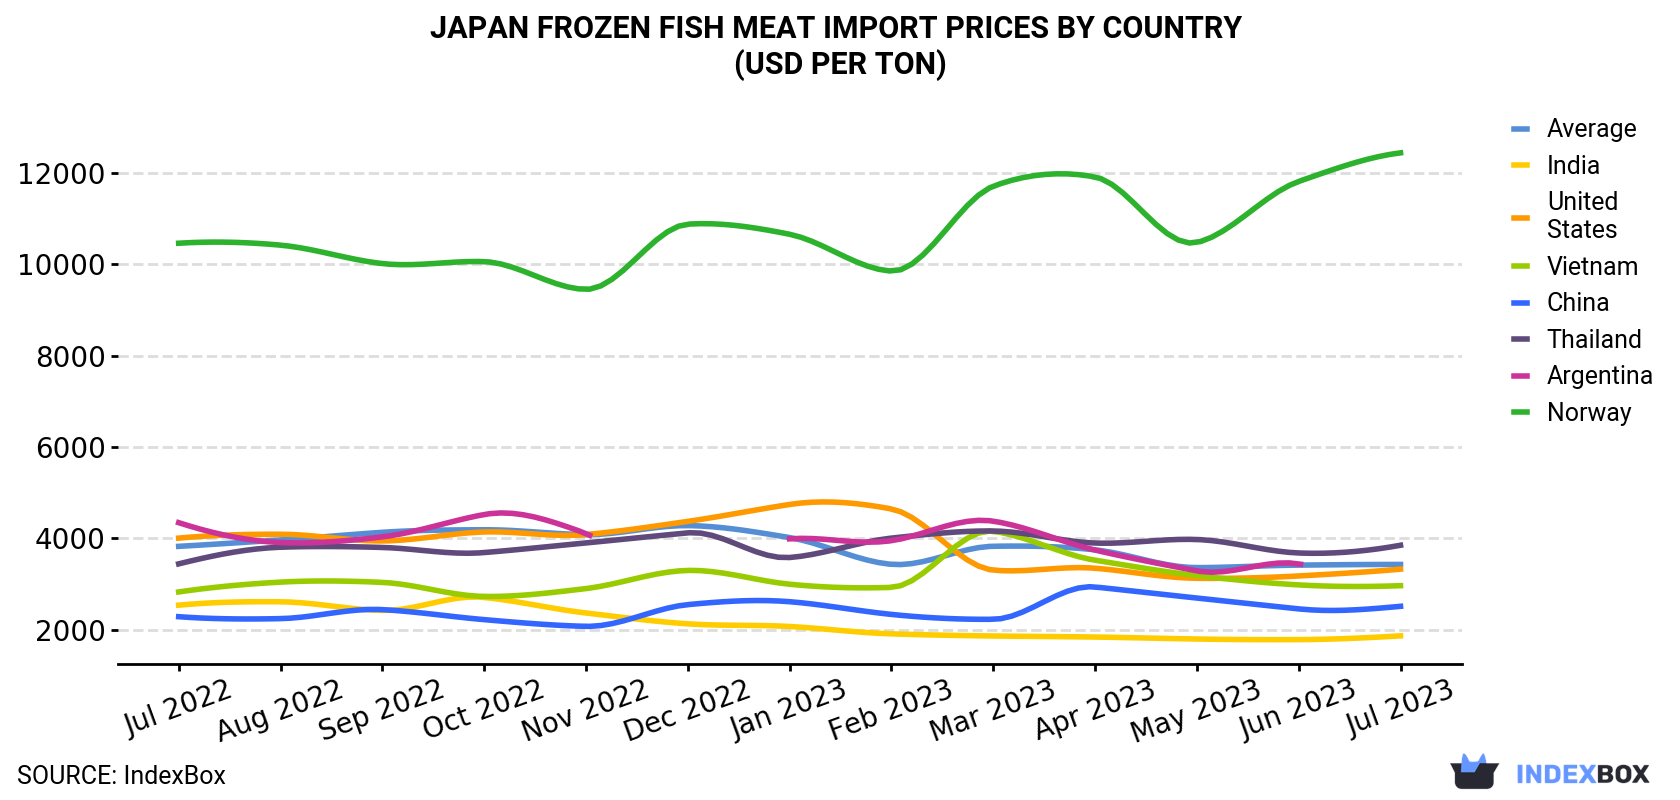 Japan Frozen Fish Meat Import Prices By Country (USD Per Ton)